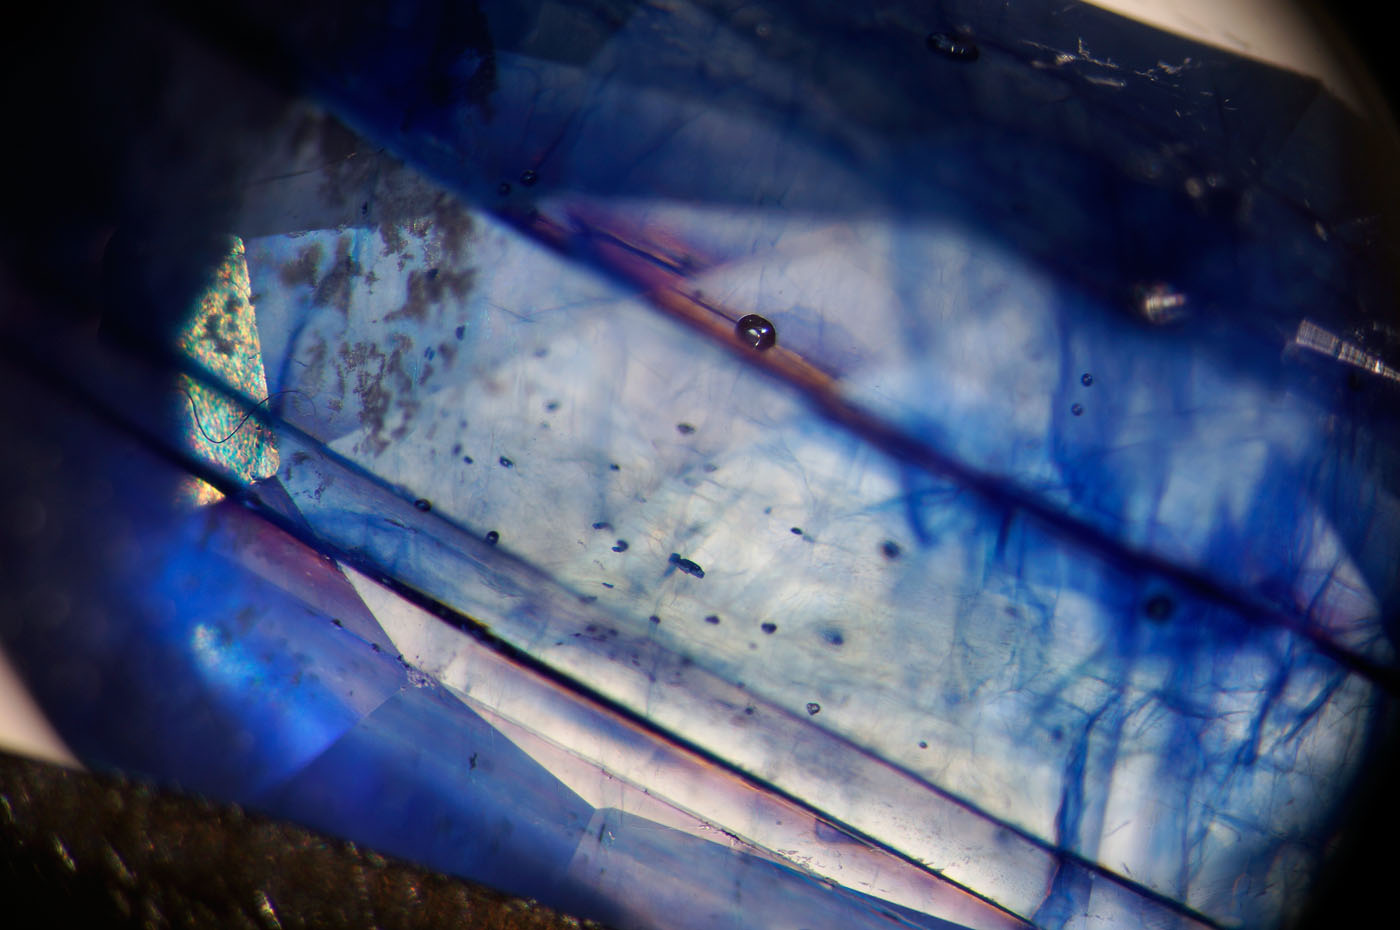 Figure 11. When viewed with transmitted light field illumination, rich blue color concentrations are found in the fissures. Photo: Wimon Manorotkul